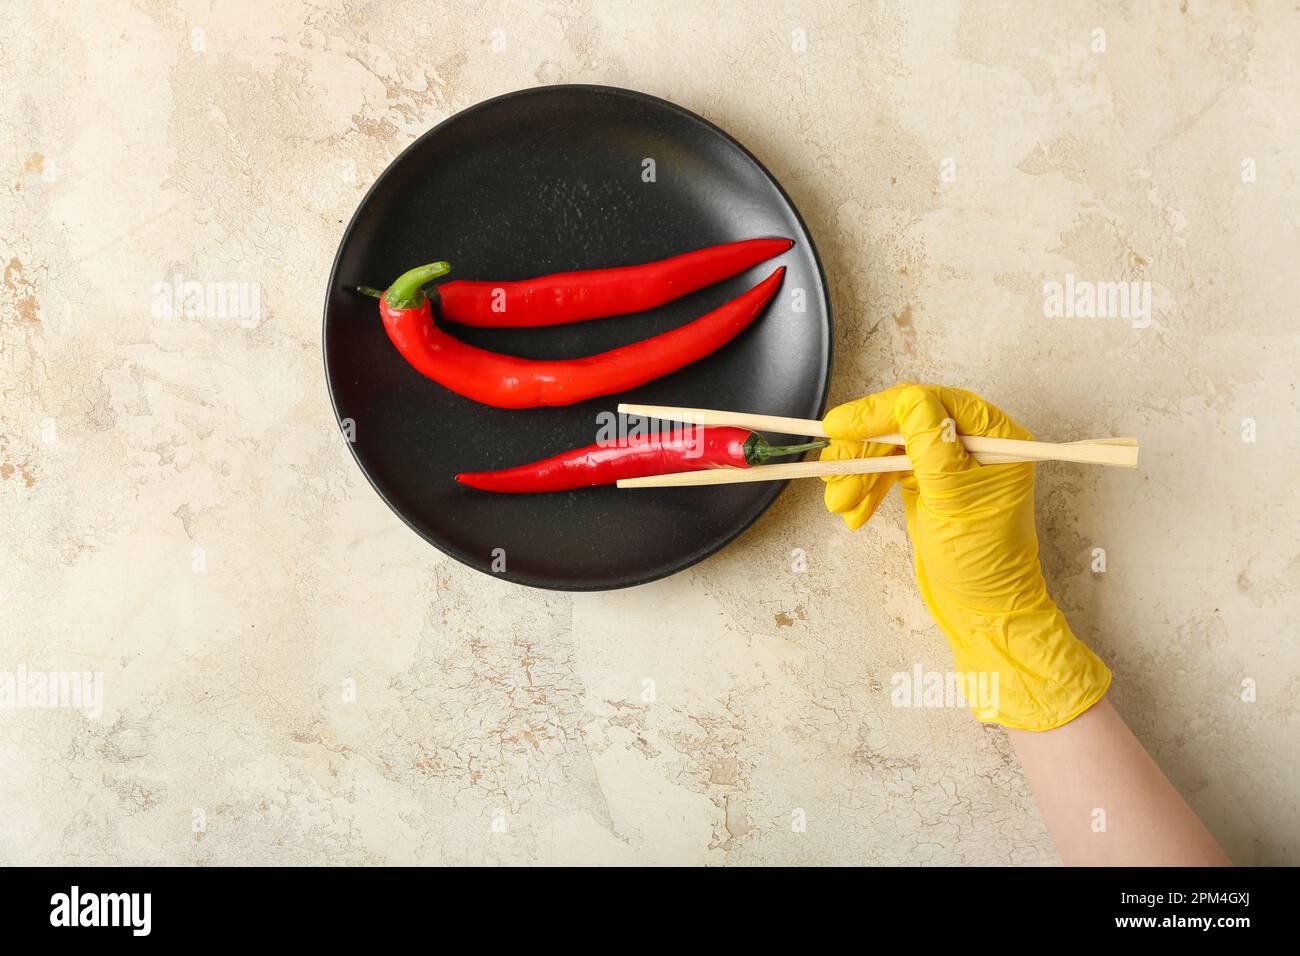 Woman in rubber glove with chopsticks and plate of chili peppers on grunge background Stock Photo